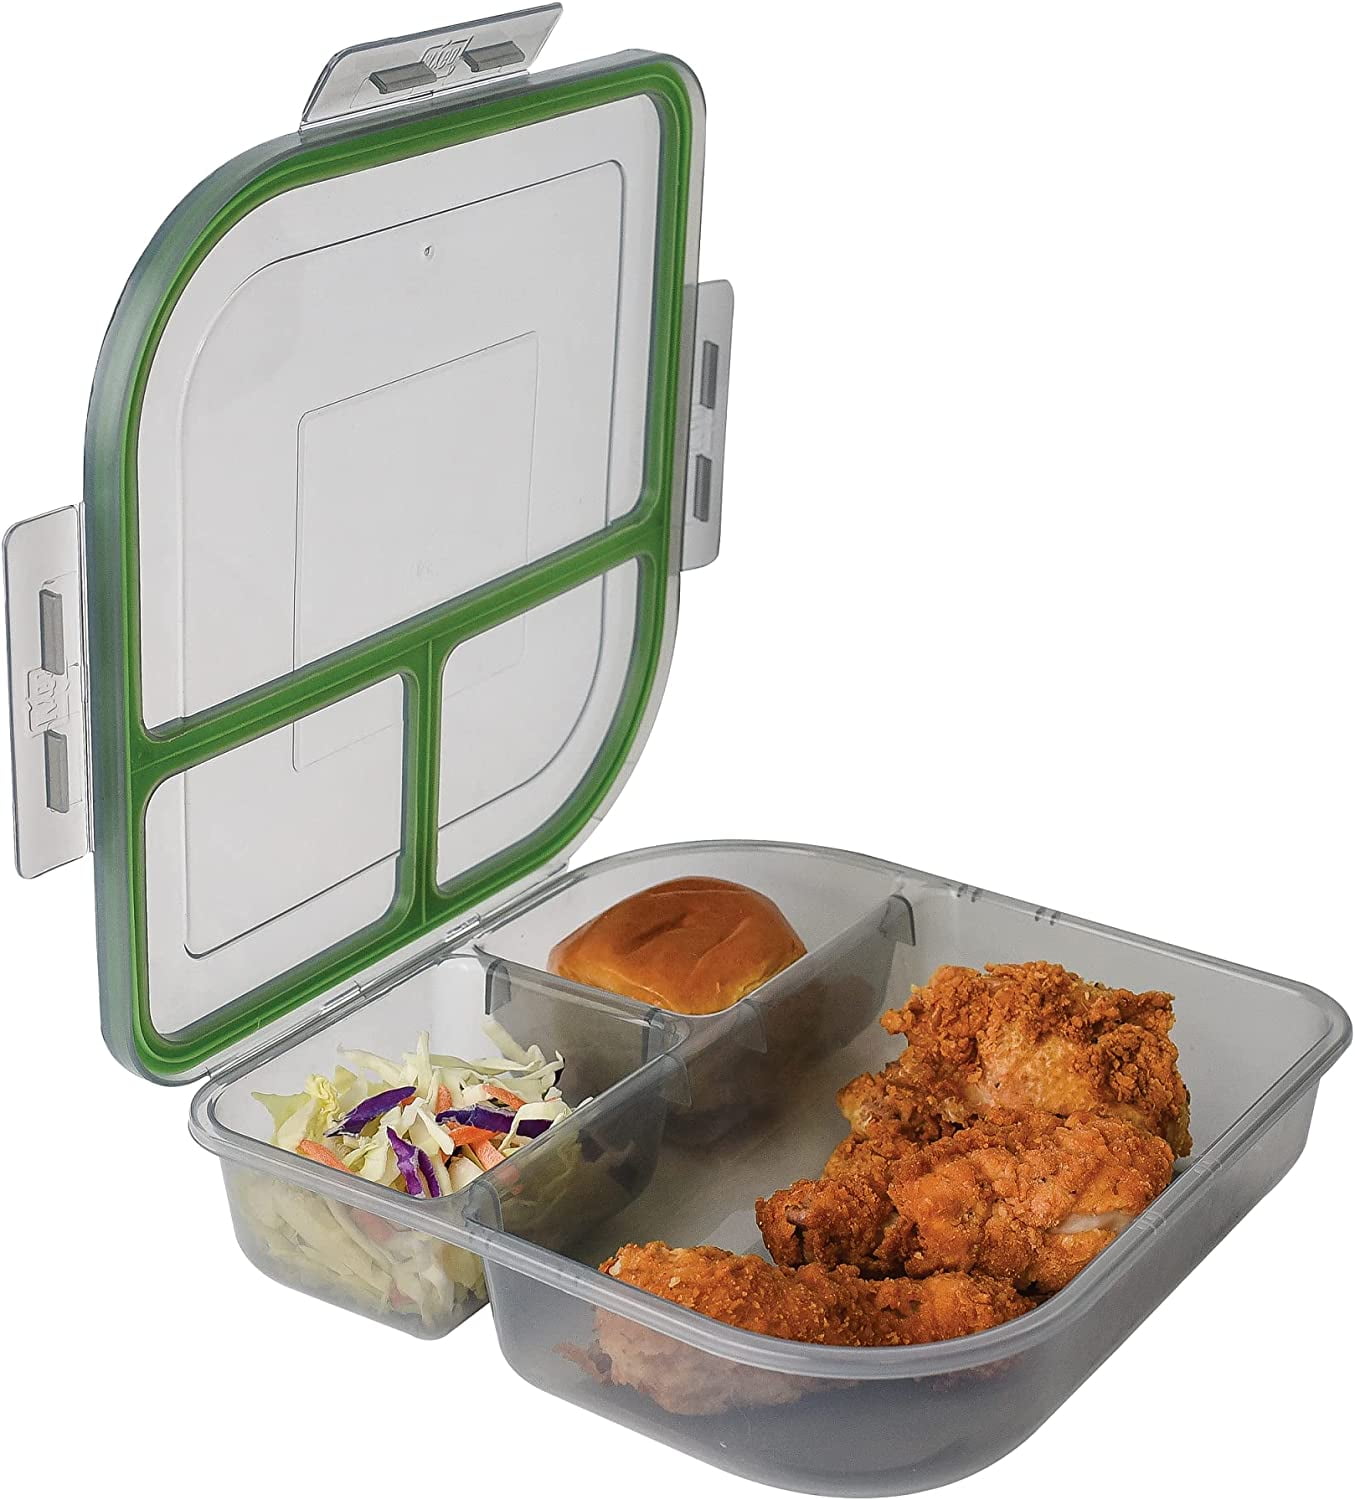 Preserve2Go 9 x 9 - Reusable to-go Container (48 count